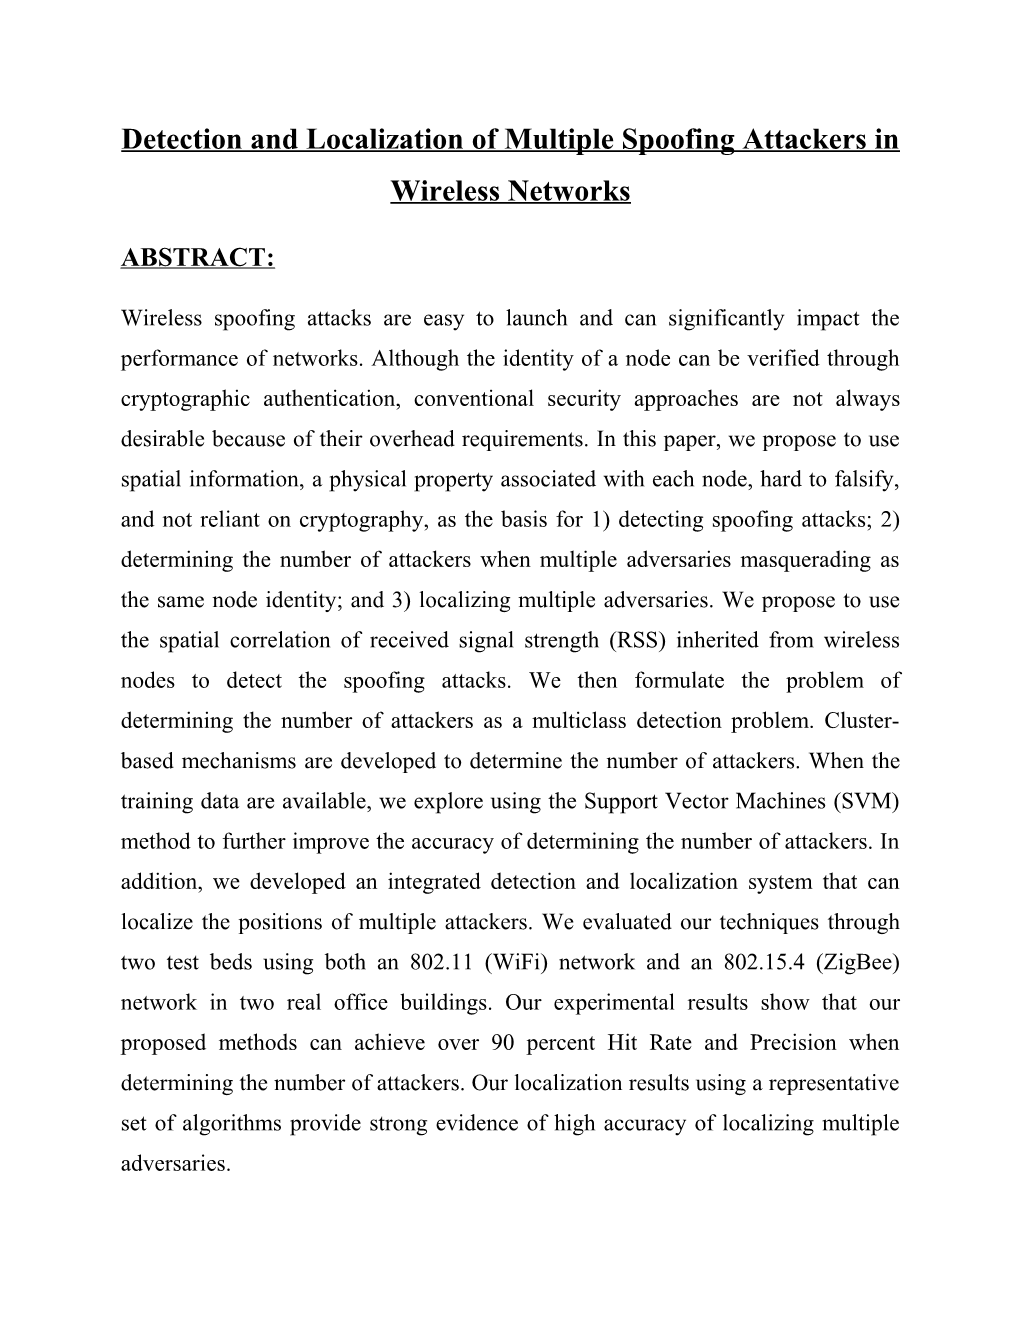 Detection and Localization of Multiple Spoofing Attackers in Wireless Networksdetection